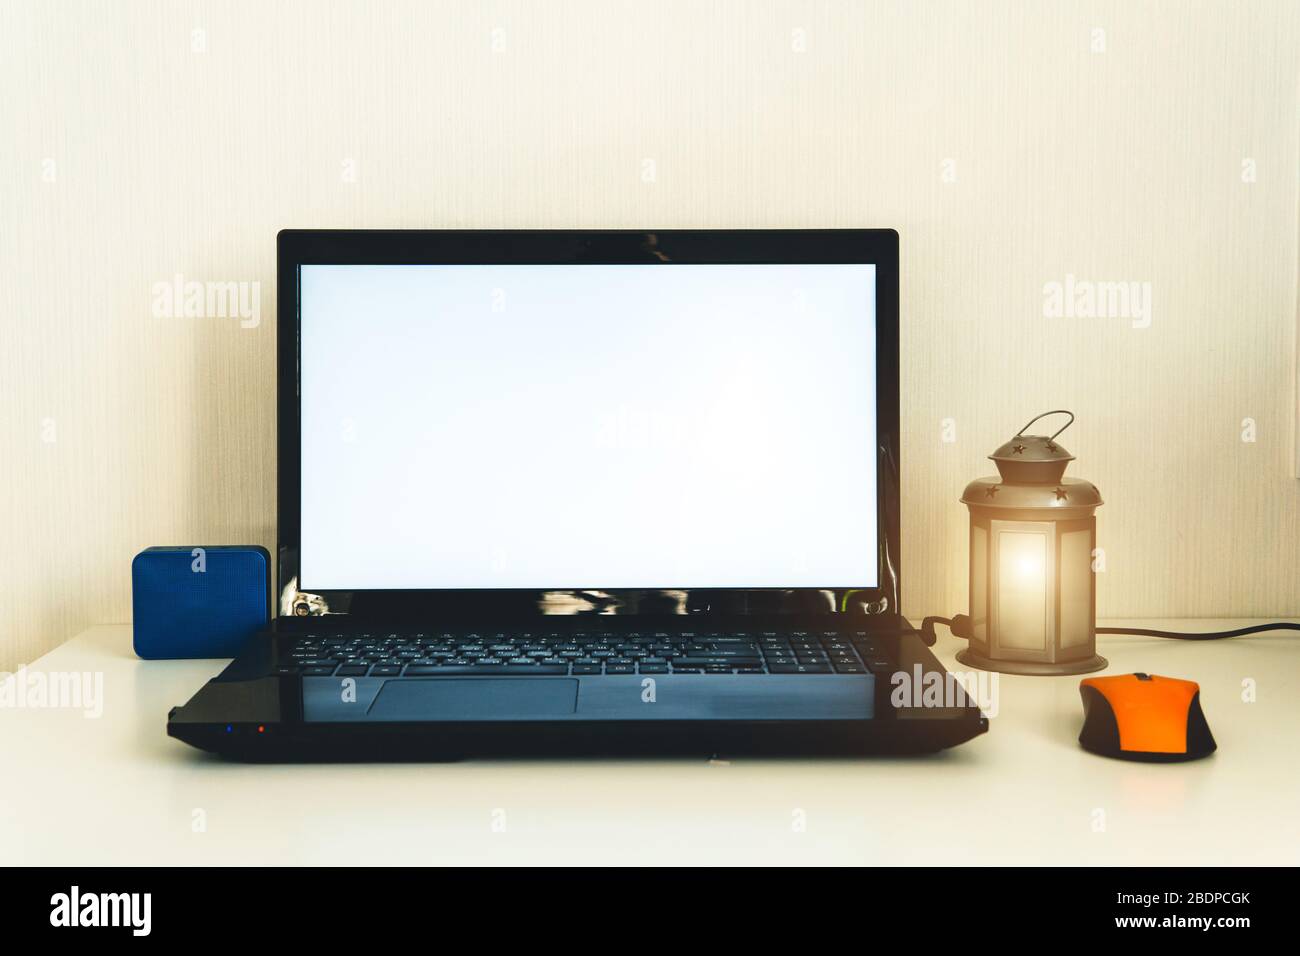 Home office workplace. Work from home. Notebook, bluetooth speaker and nice lamp on the table. Freelance, work at home or quarantine concept. Stock Photo